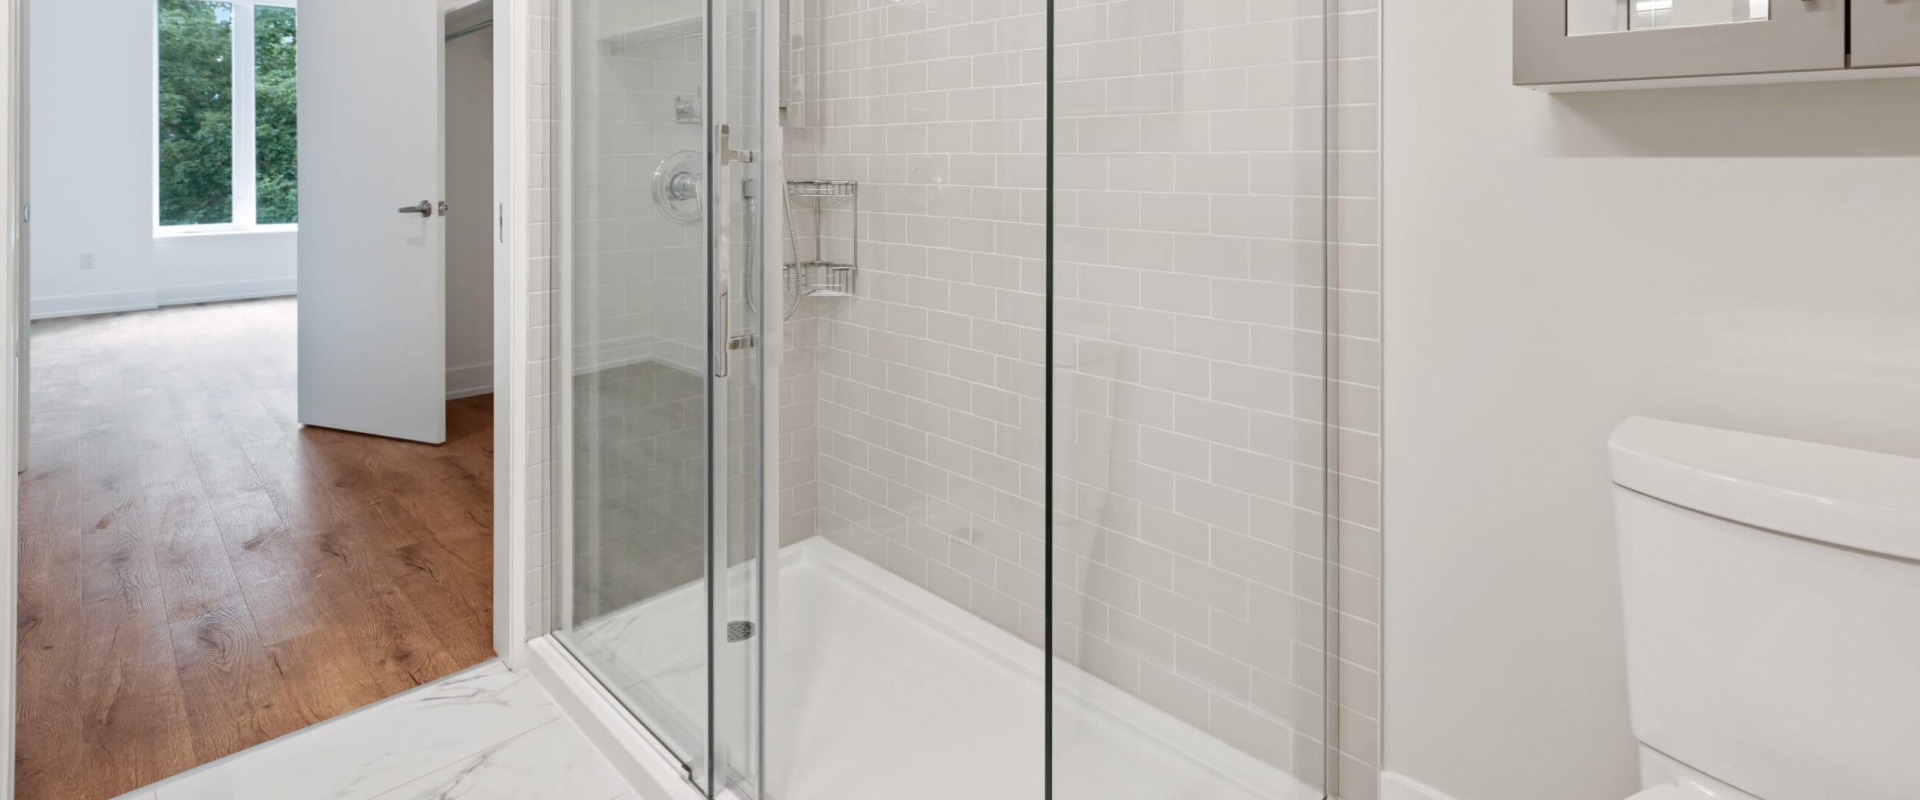 Replacing a Shower Door: All You Need to Know